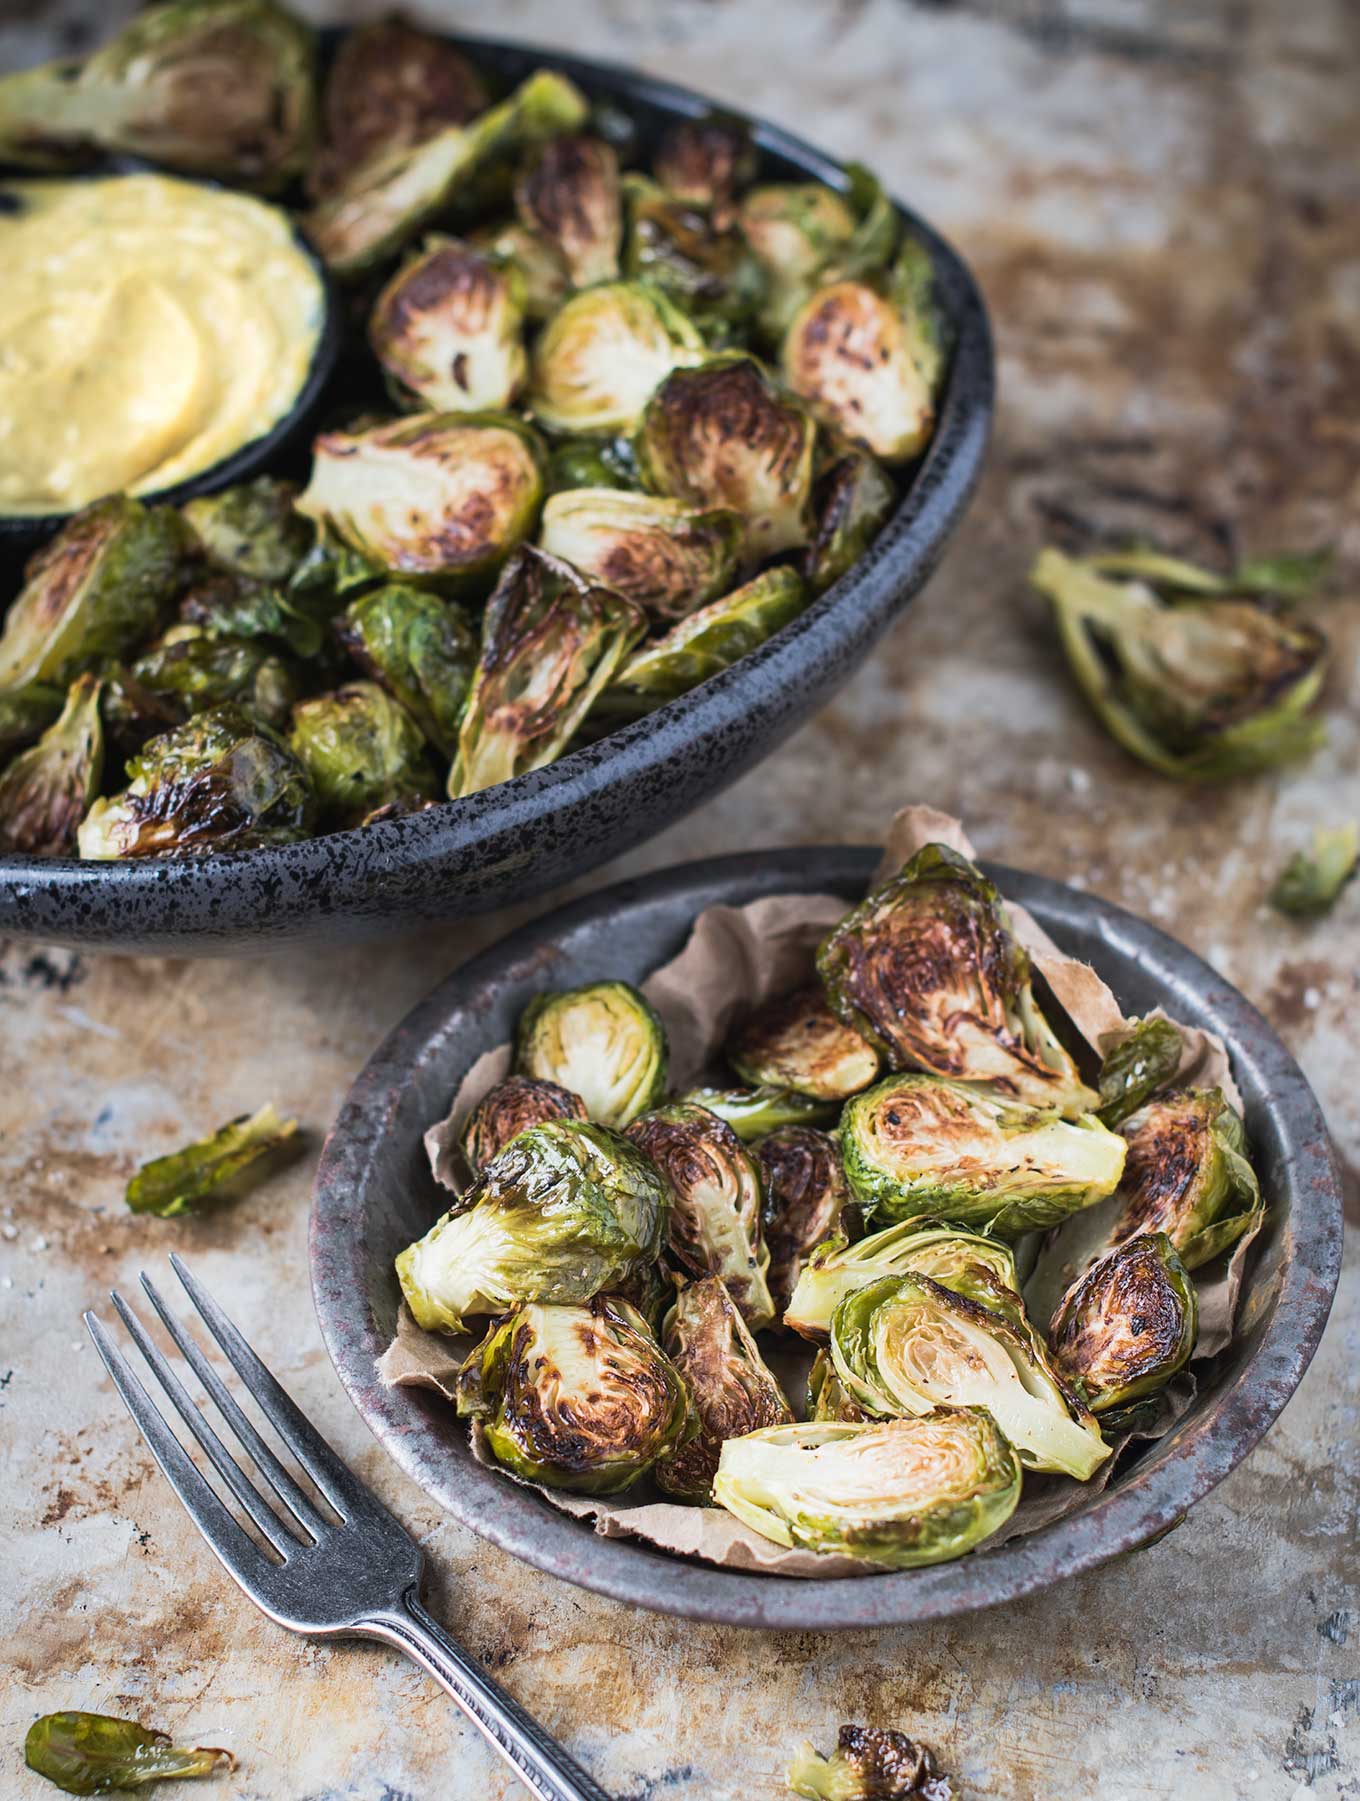 Roasted brussels sprouts with curry aioli